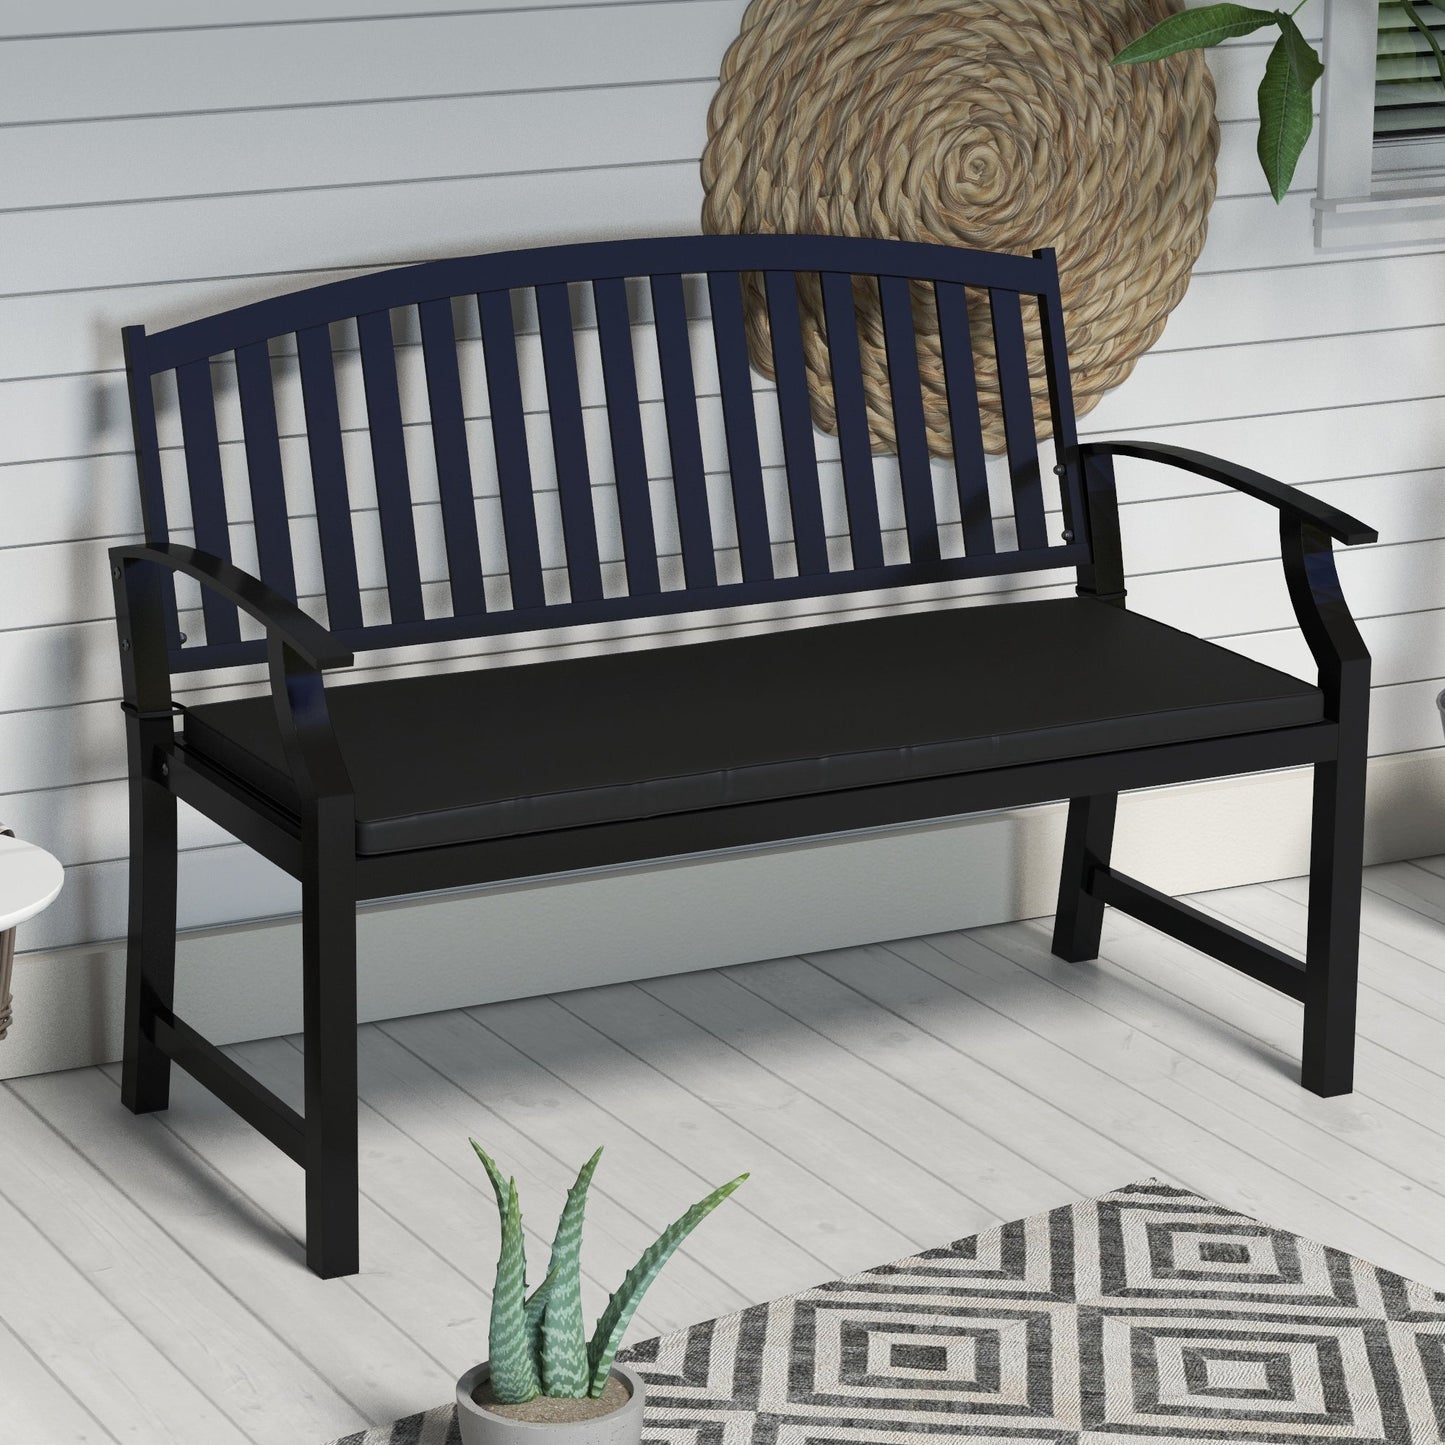 2-Seater Patio Bench Cushion Outdoor Seat Swing Replacement Pad with Zipper Cover, Ties for Patio, Garden, Black at Gallery Canada